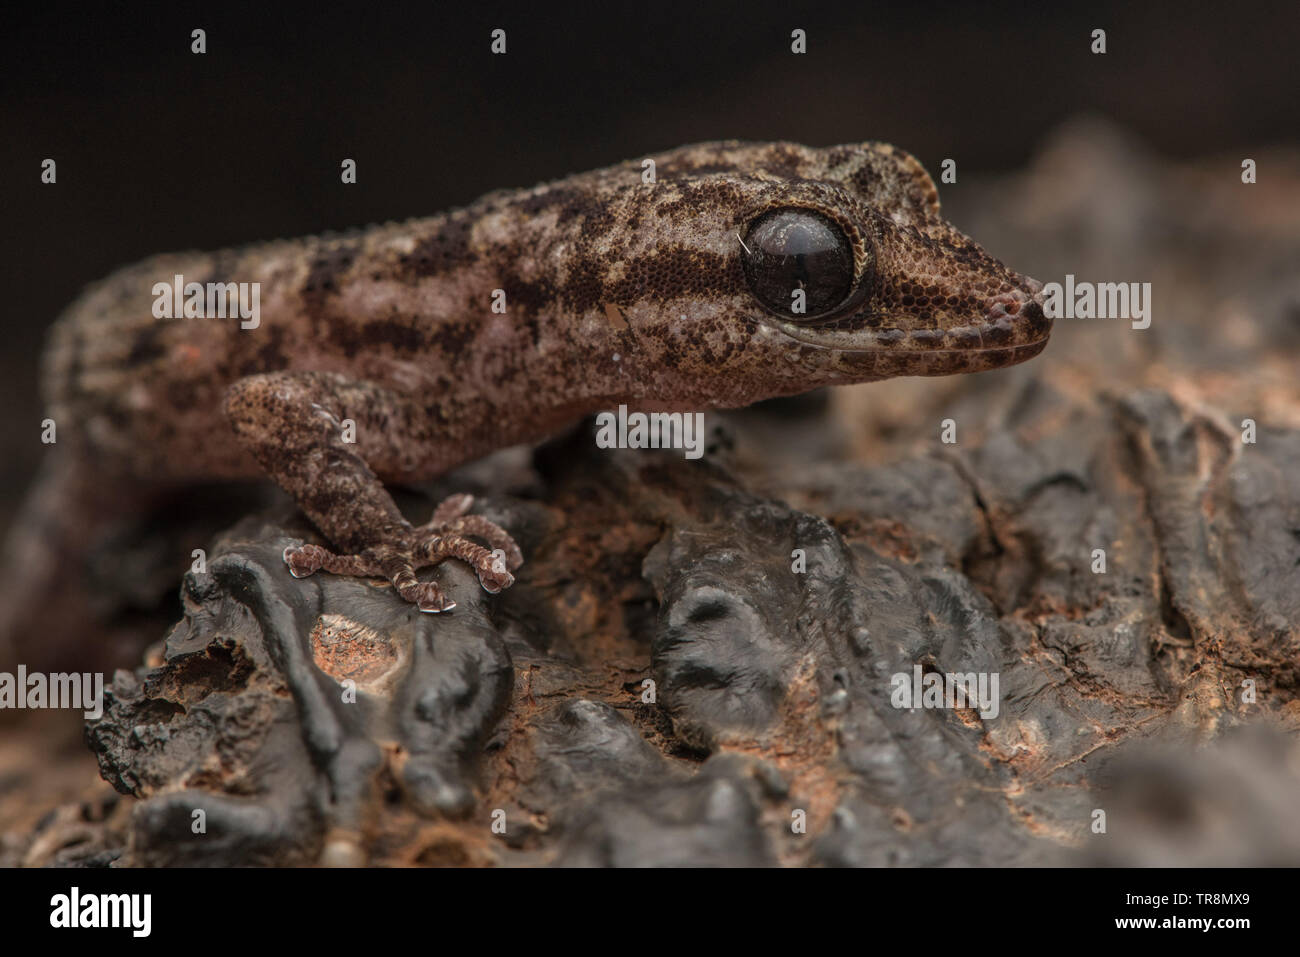 Galapagos Leaf-toed Gecko (Phyllodactylus galapagensis), the leaf toed geckos are the lesser known of the reptiles endemic to the Galapagos islands. Stock Photo